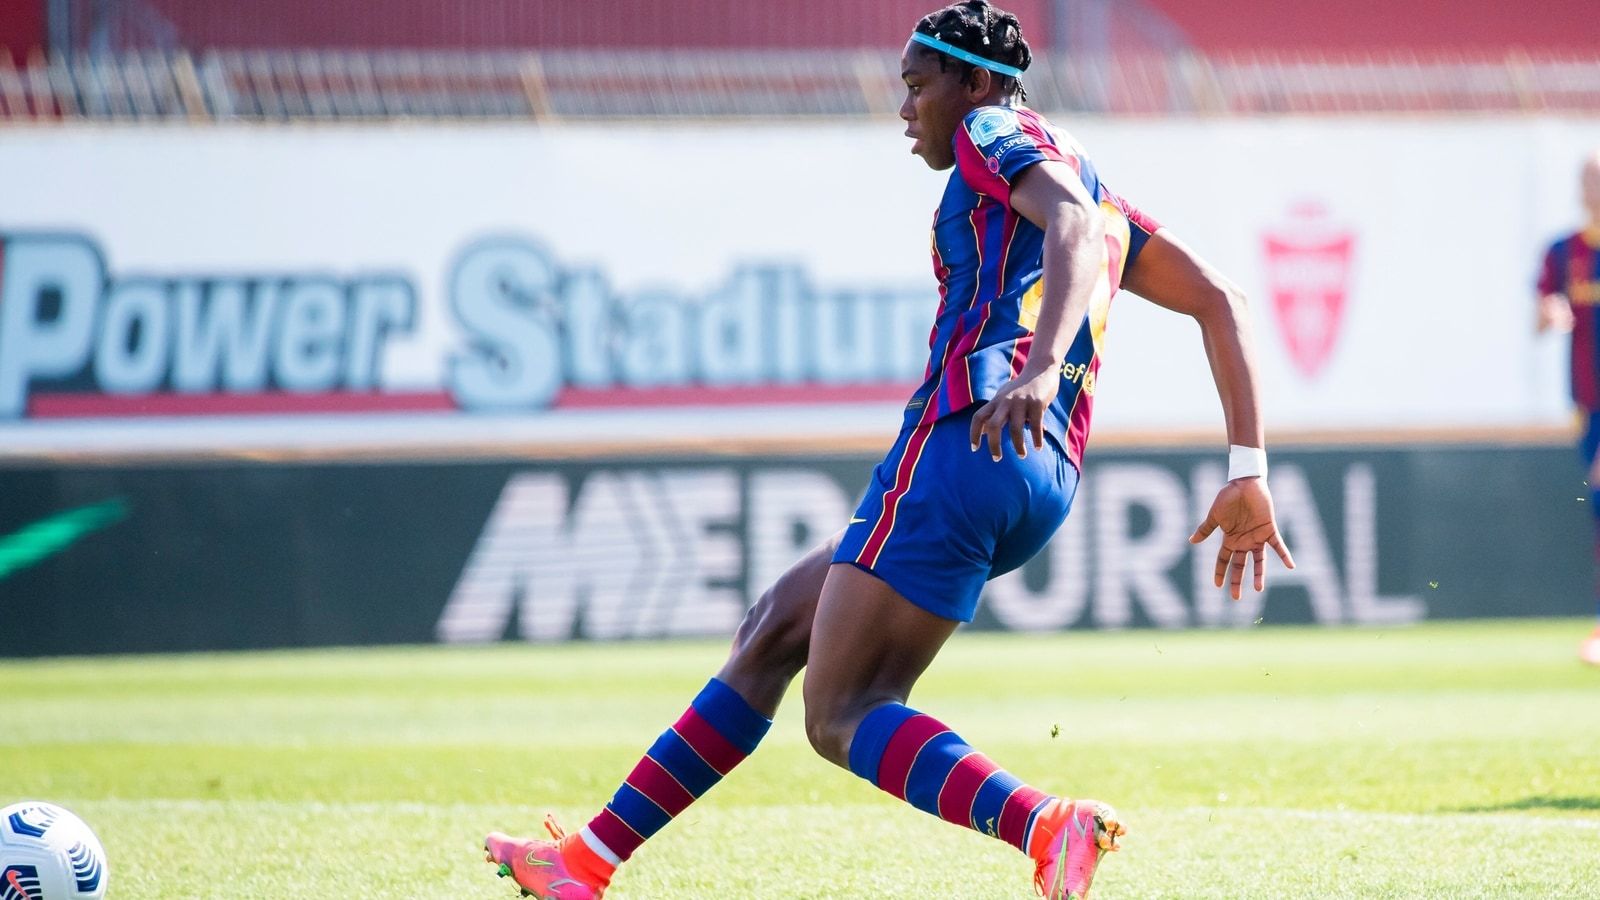 UEFA Women's Champions League final: For Barcelona's Asisat Oshoala, repeating mistakes from 2019 is not an option